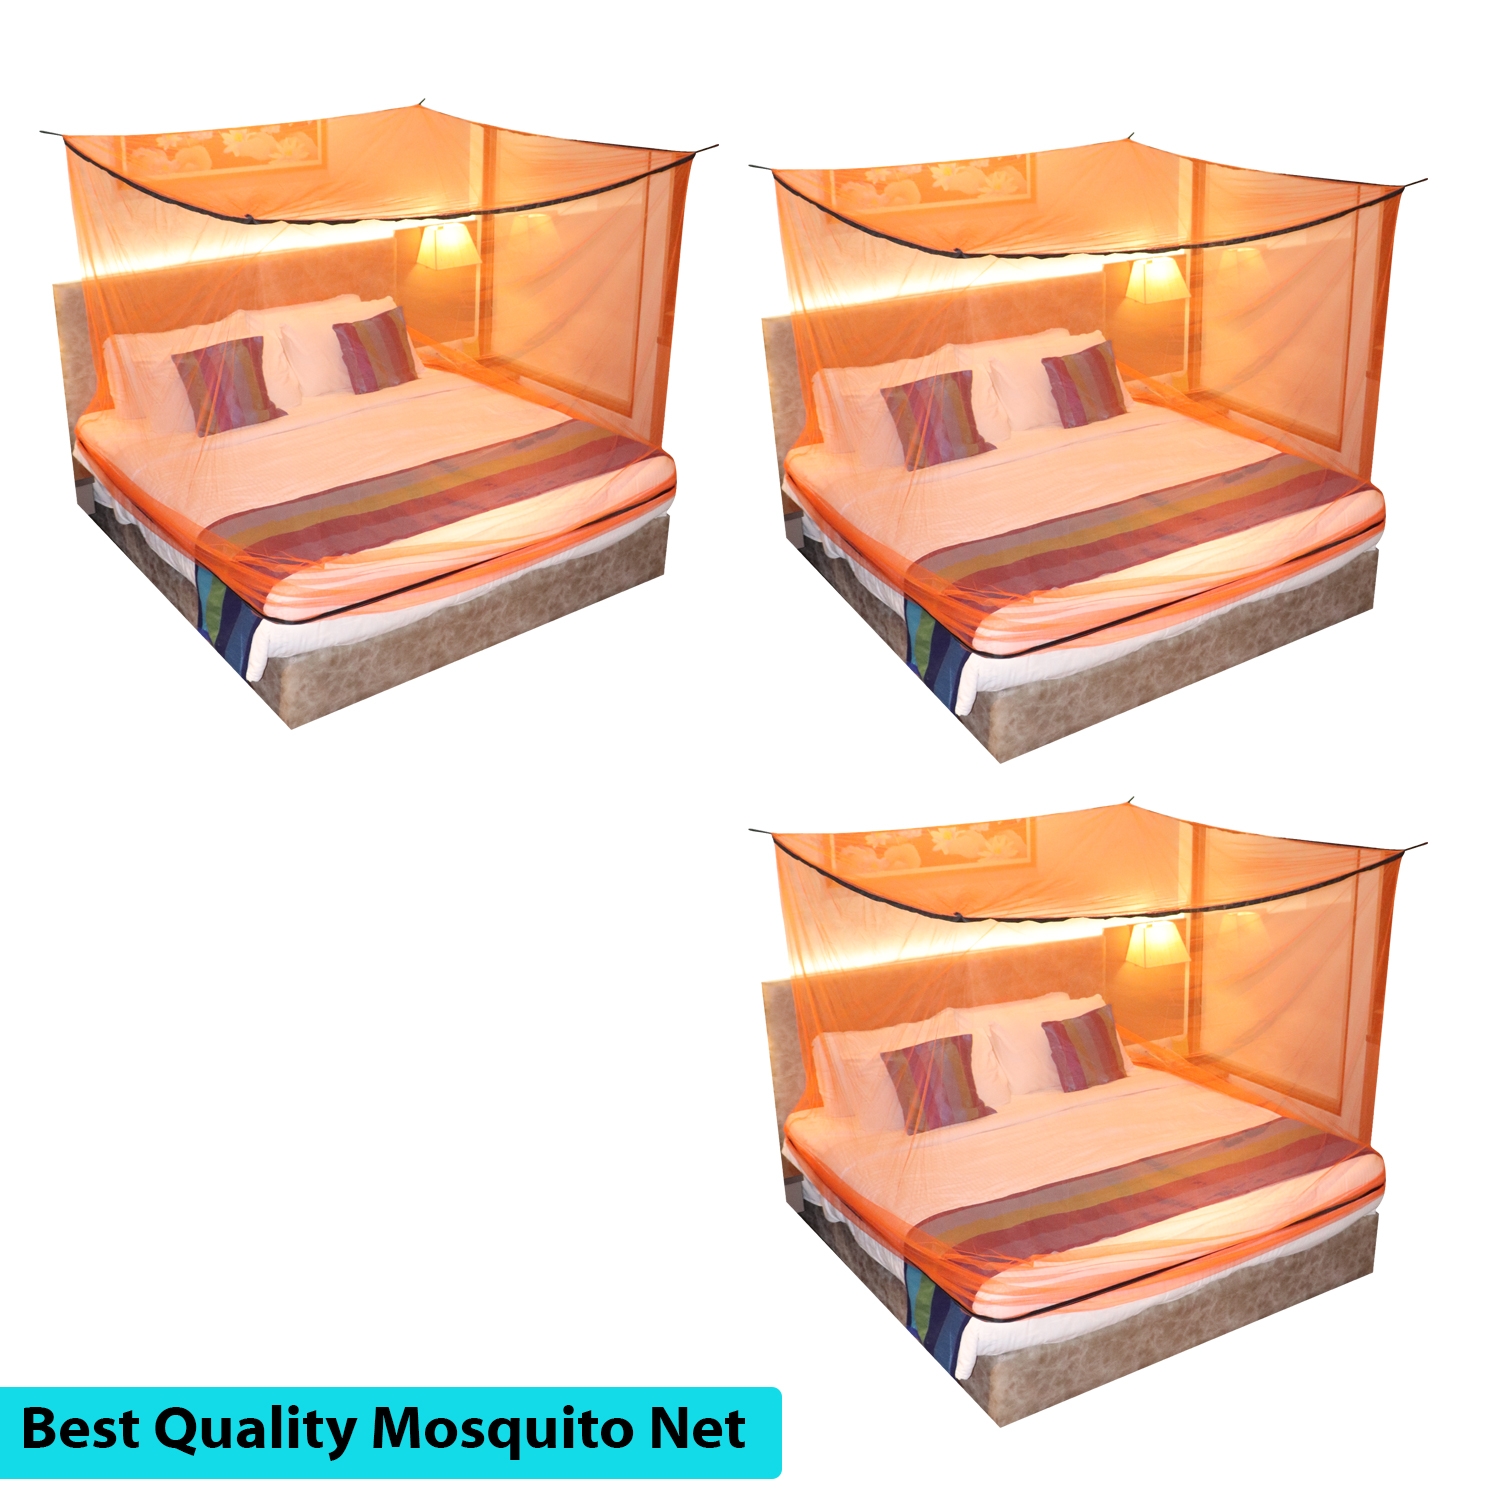 SILVER SHINE | Mosquito Net for Double Bed, King-Size, Square Hanging Foldable Polyester Net Orange And Black Pack of 3 0